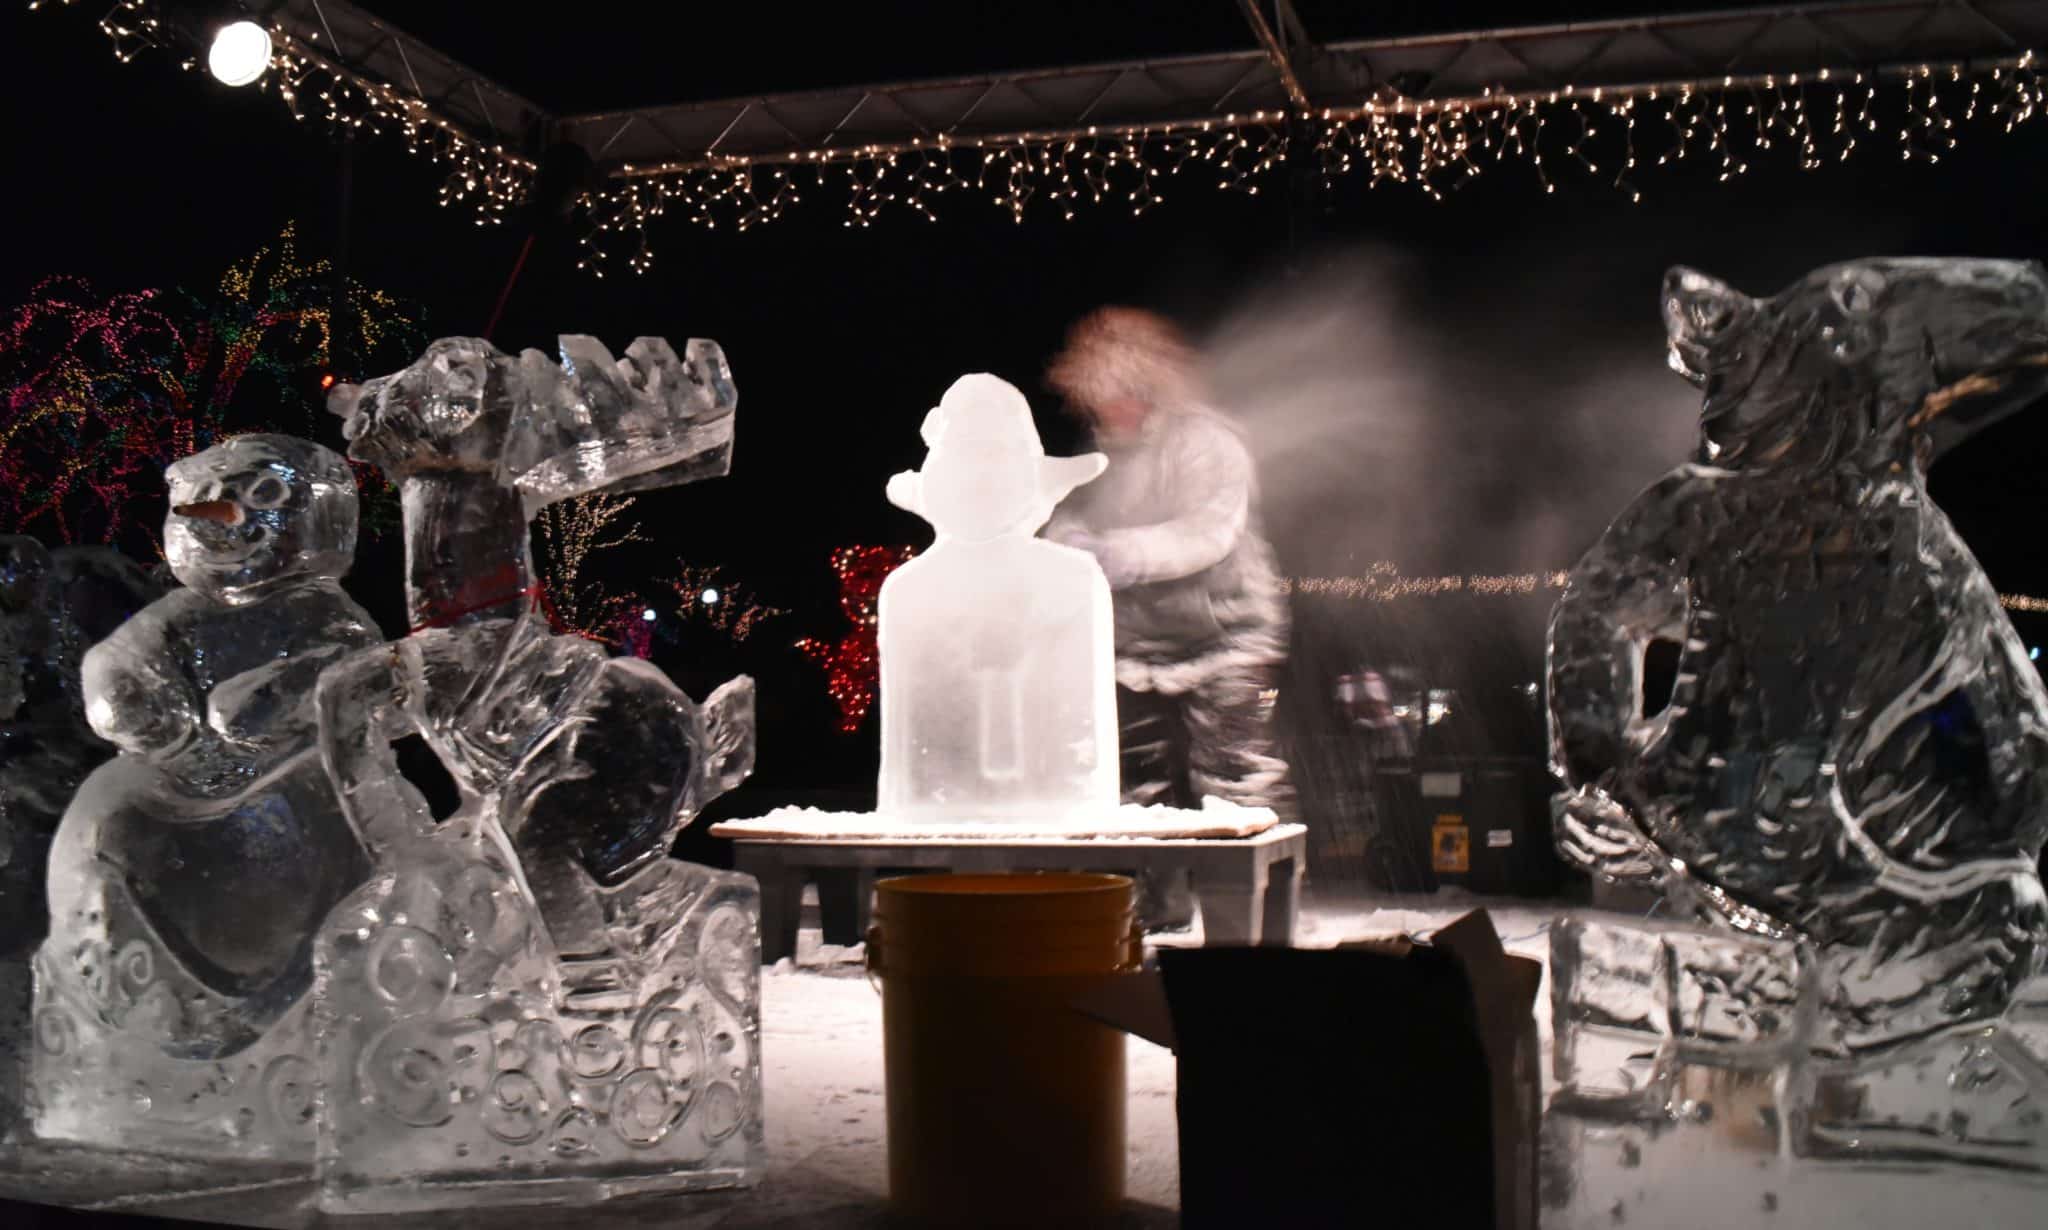 Ice Sculpture demonstration presentation show at Zoo Lights, Lincoln Park Zoo, Chicago, IL, December 13th, 2017